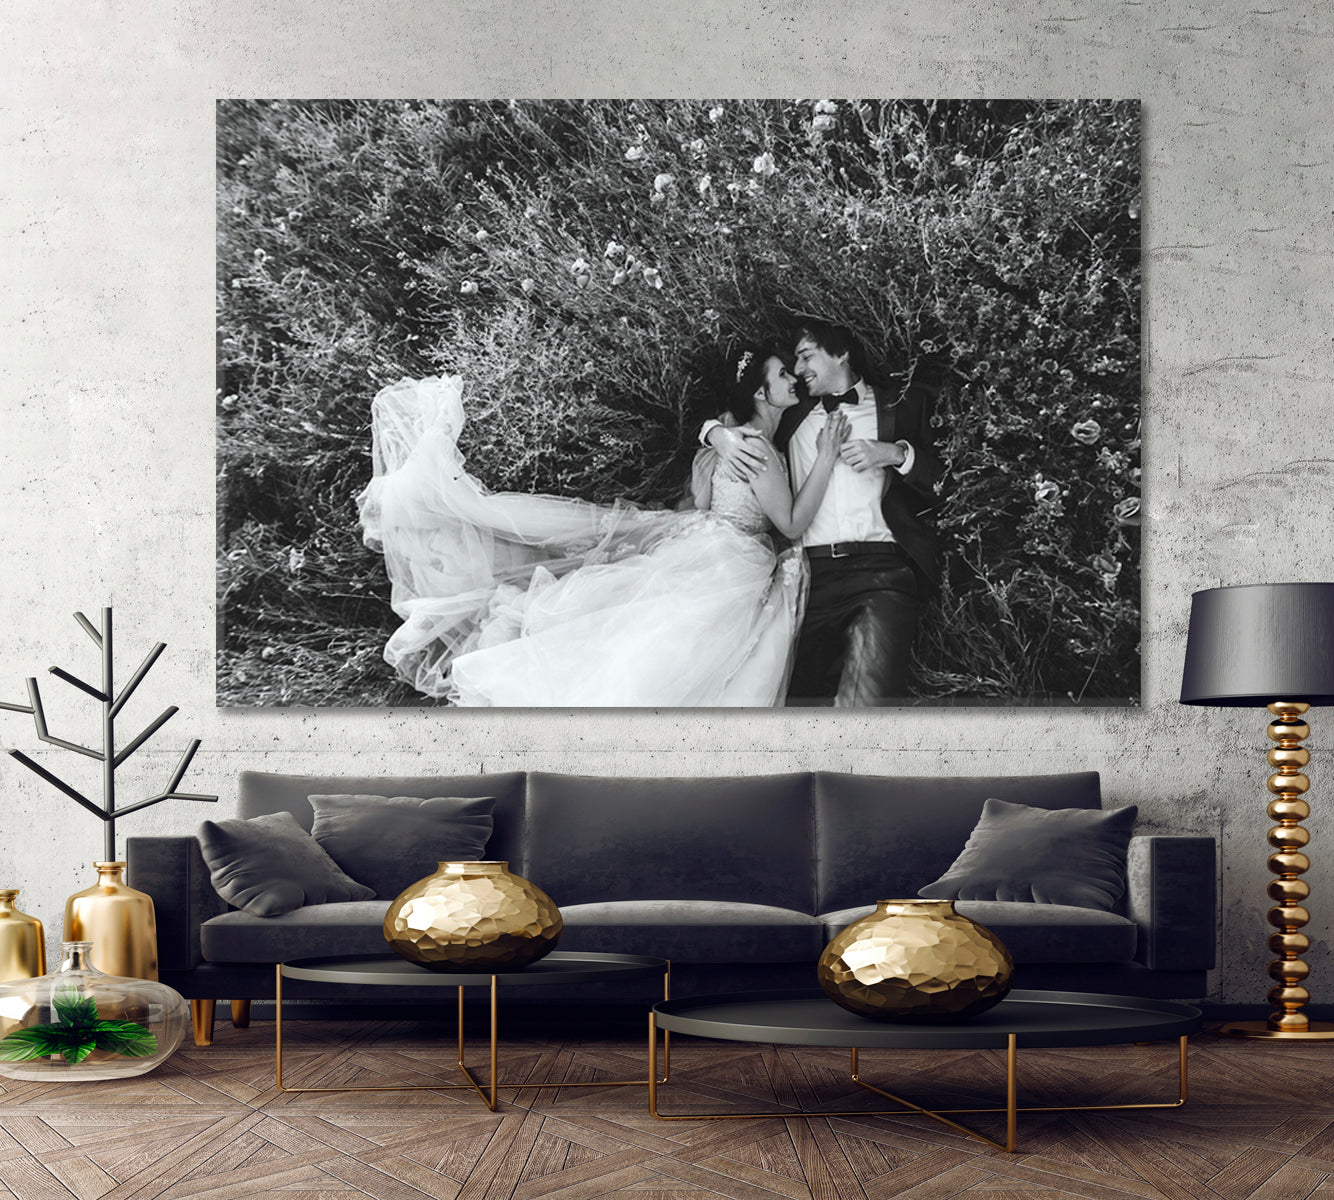 HAPPINESS Happy Life Couple Bride and Groom Wedding Love Family Marriage B&W Black and White Wall Art Print Artesty 1 panel 24" x 16" 